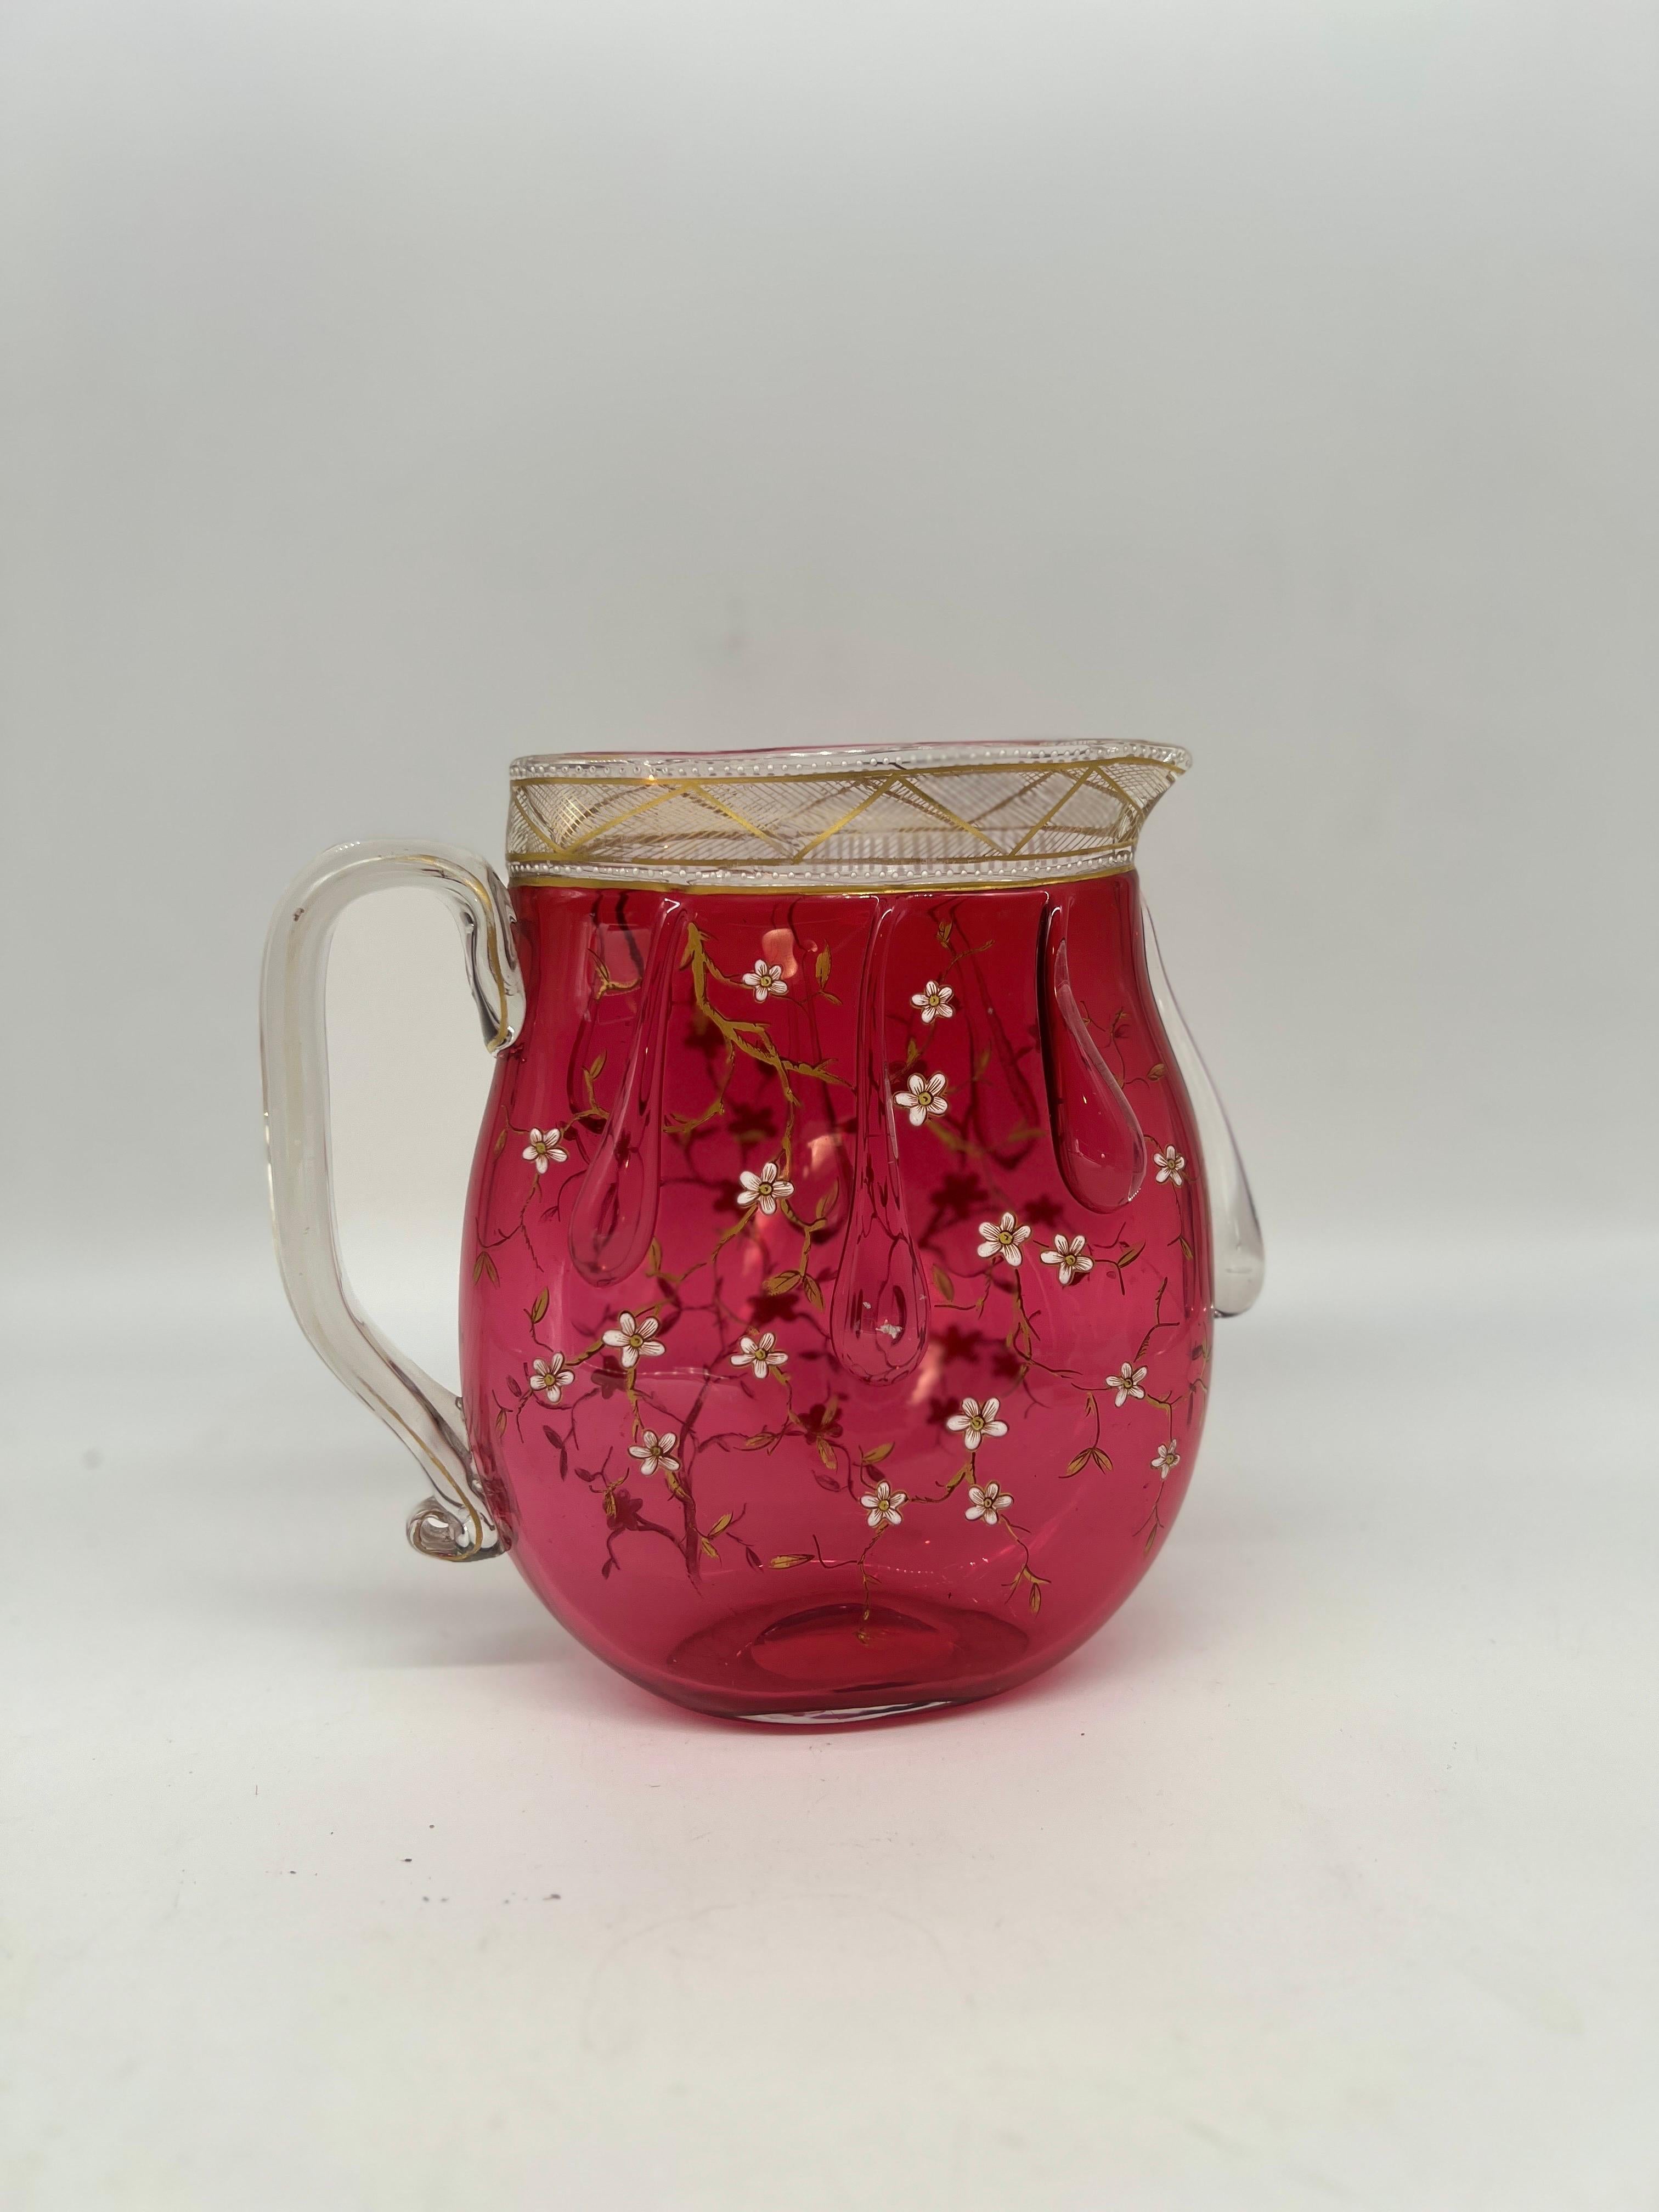 Moser Glassworks has been in business since 1857 created astonishing and remarkable art work from vases, urns, glassware and more. The firms ability to master engrave and enamel works lead them to the World Exhibition in Paris circa 1900 which later